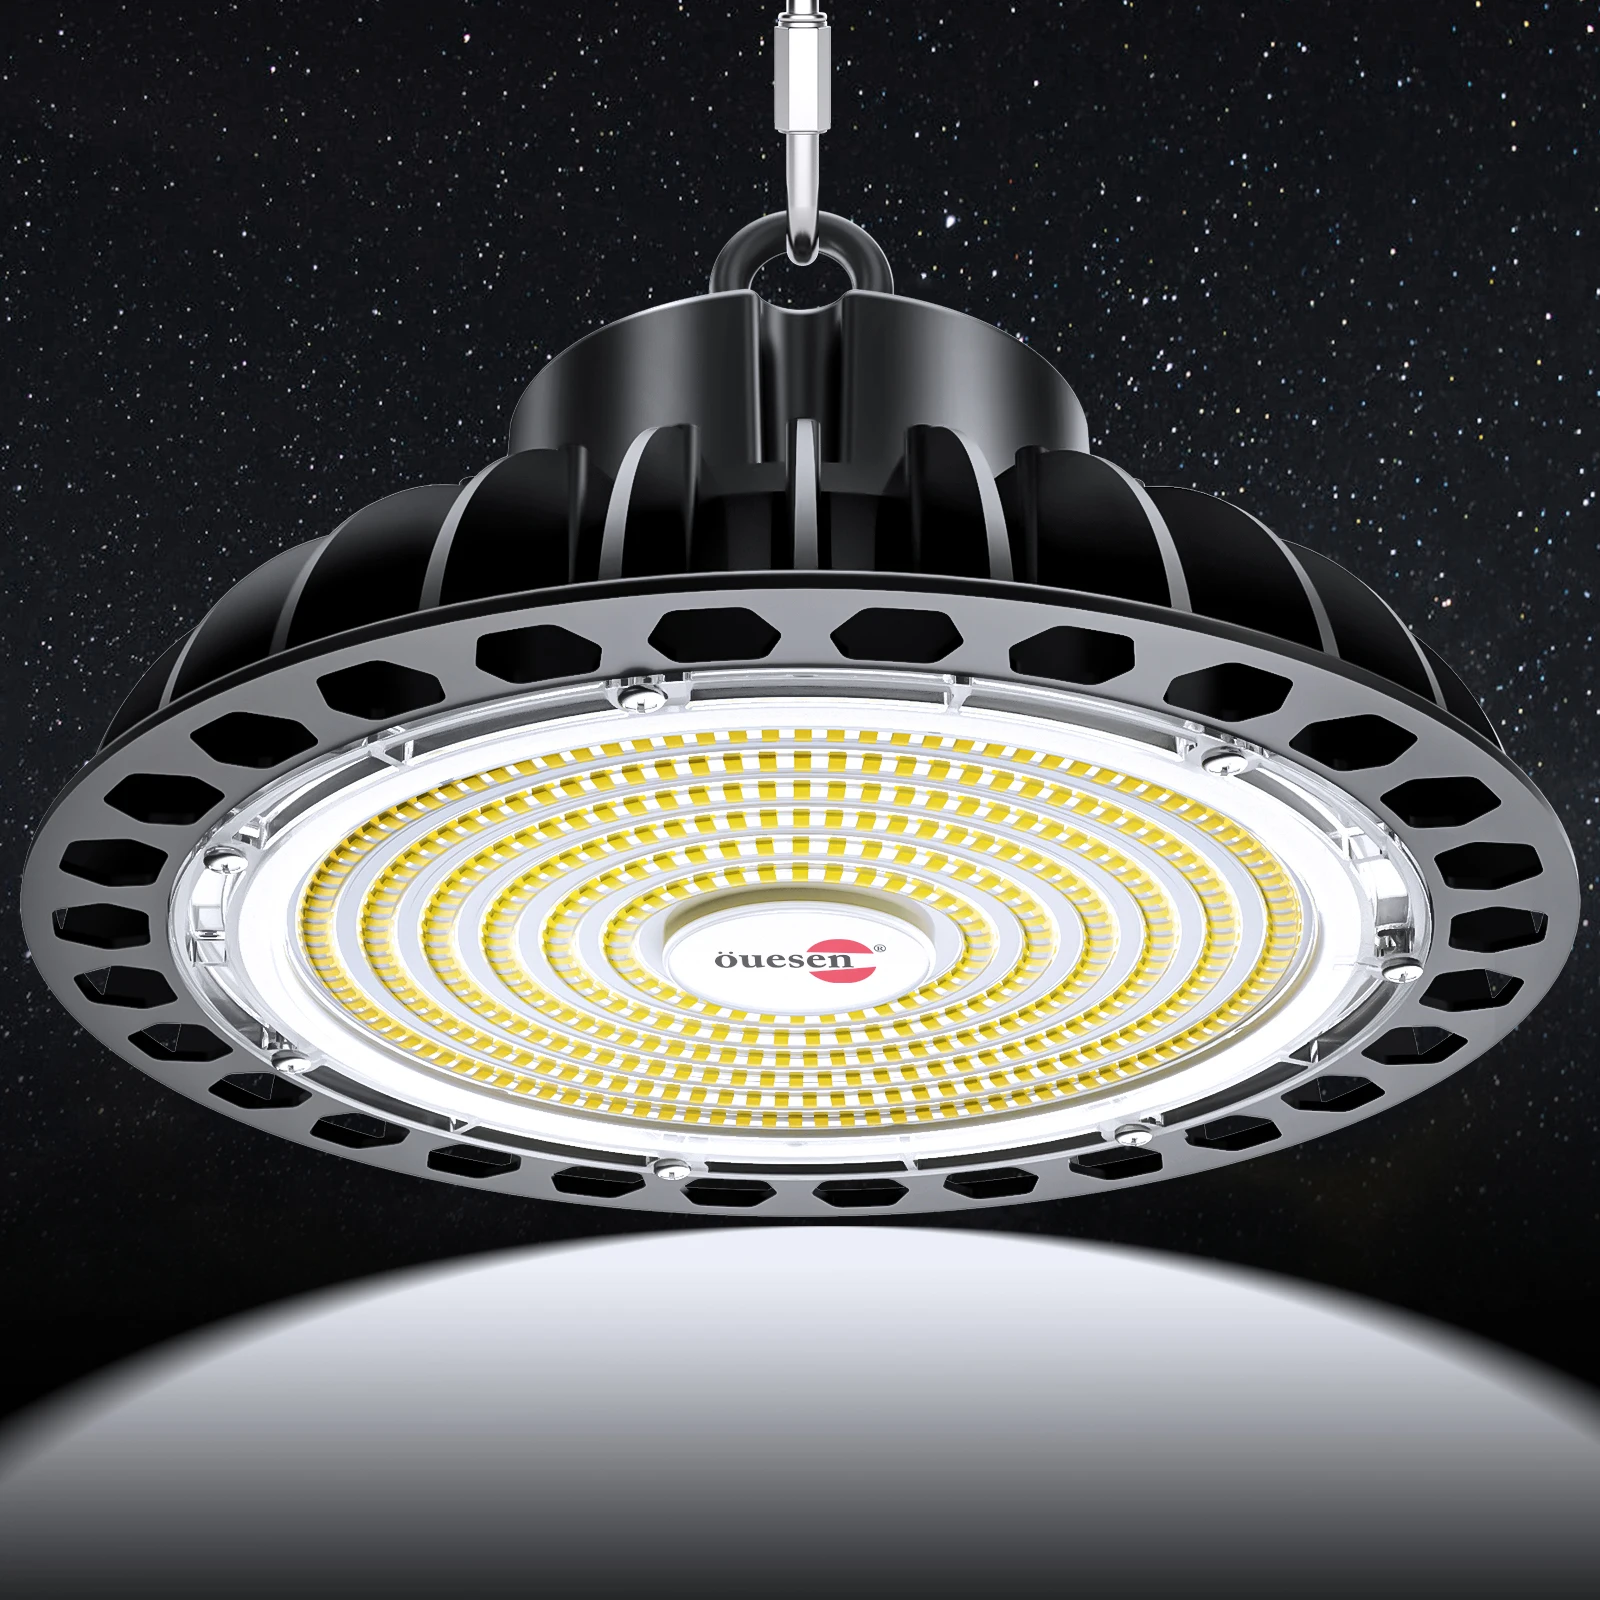 150W UFO LED High Bay Light Factory Industrial Warehouse Commercial Lighting for sale online 